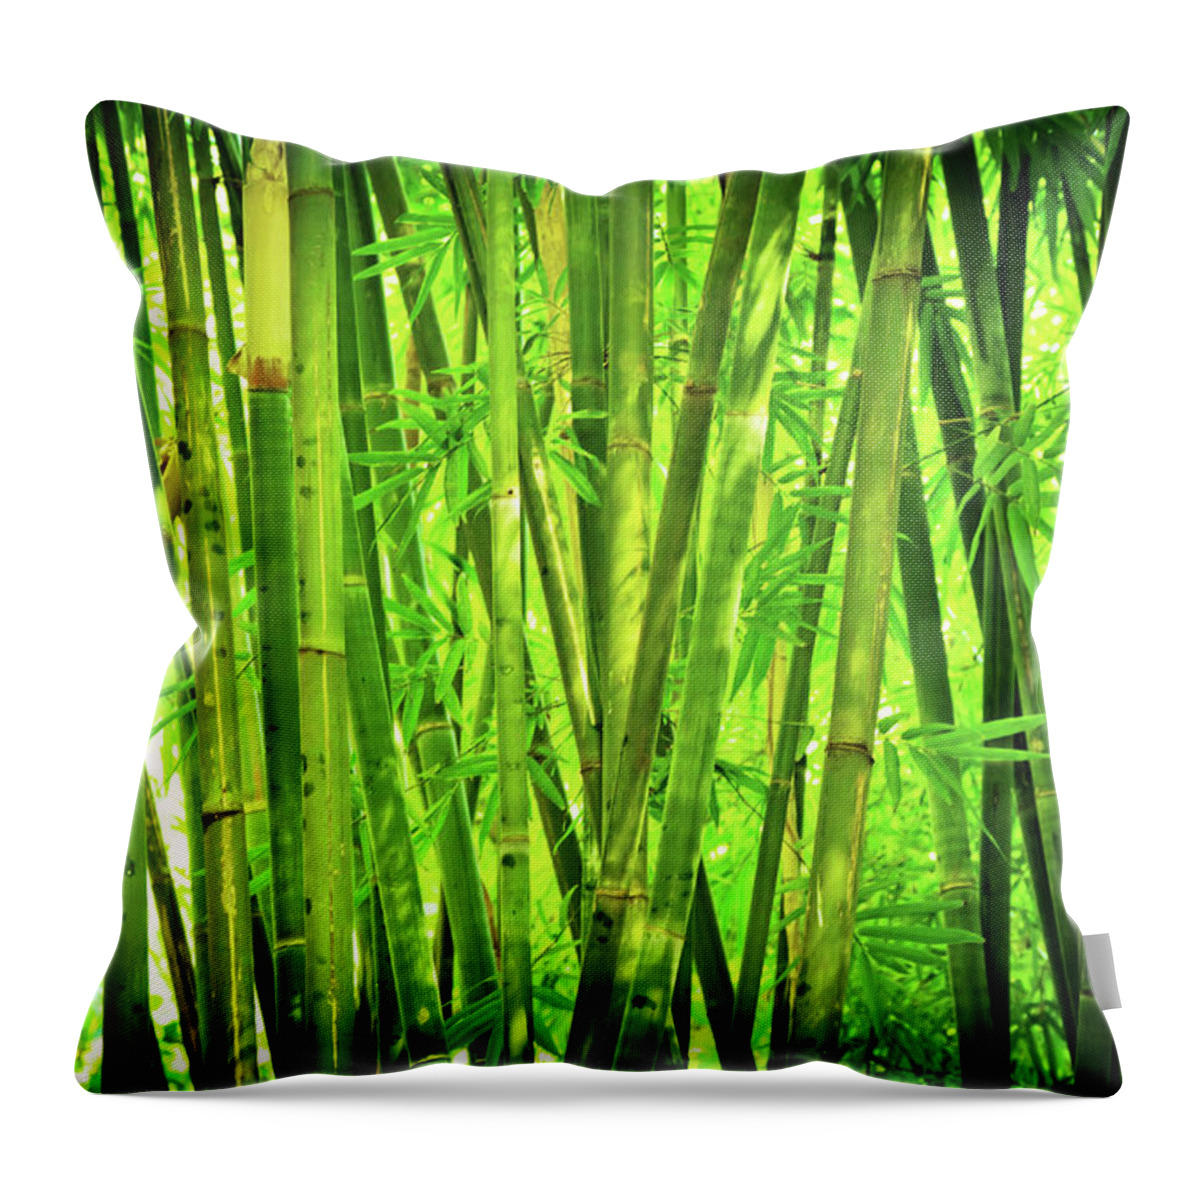 Grass Throw Pillow featuring the photograph Bamboo Forest by Nikada